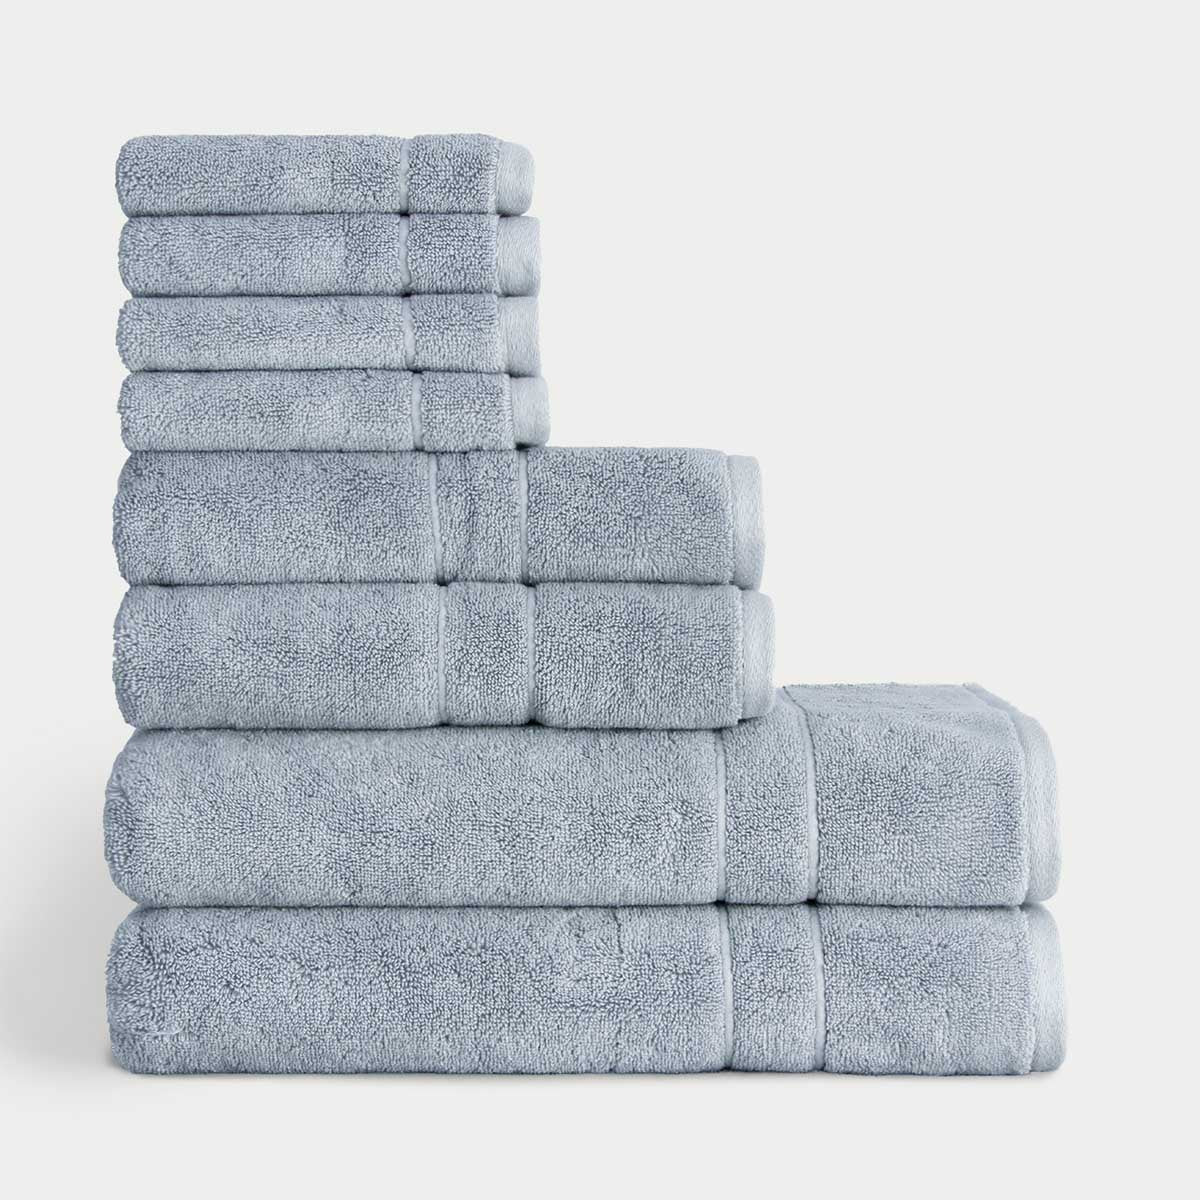 Premium Plush Bath Towel Set in the color Harbor Mist. Photo of Premium Plush Bath Towel Set taken with white background 